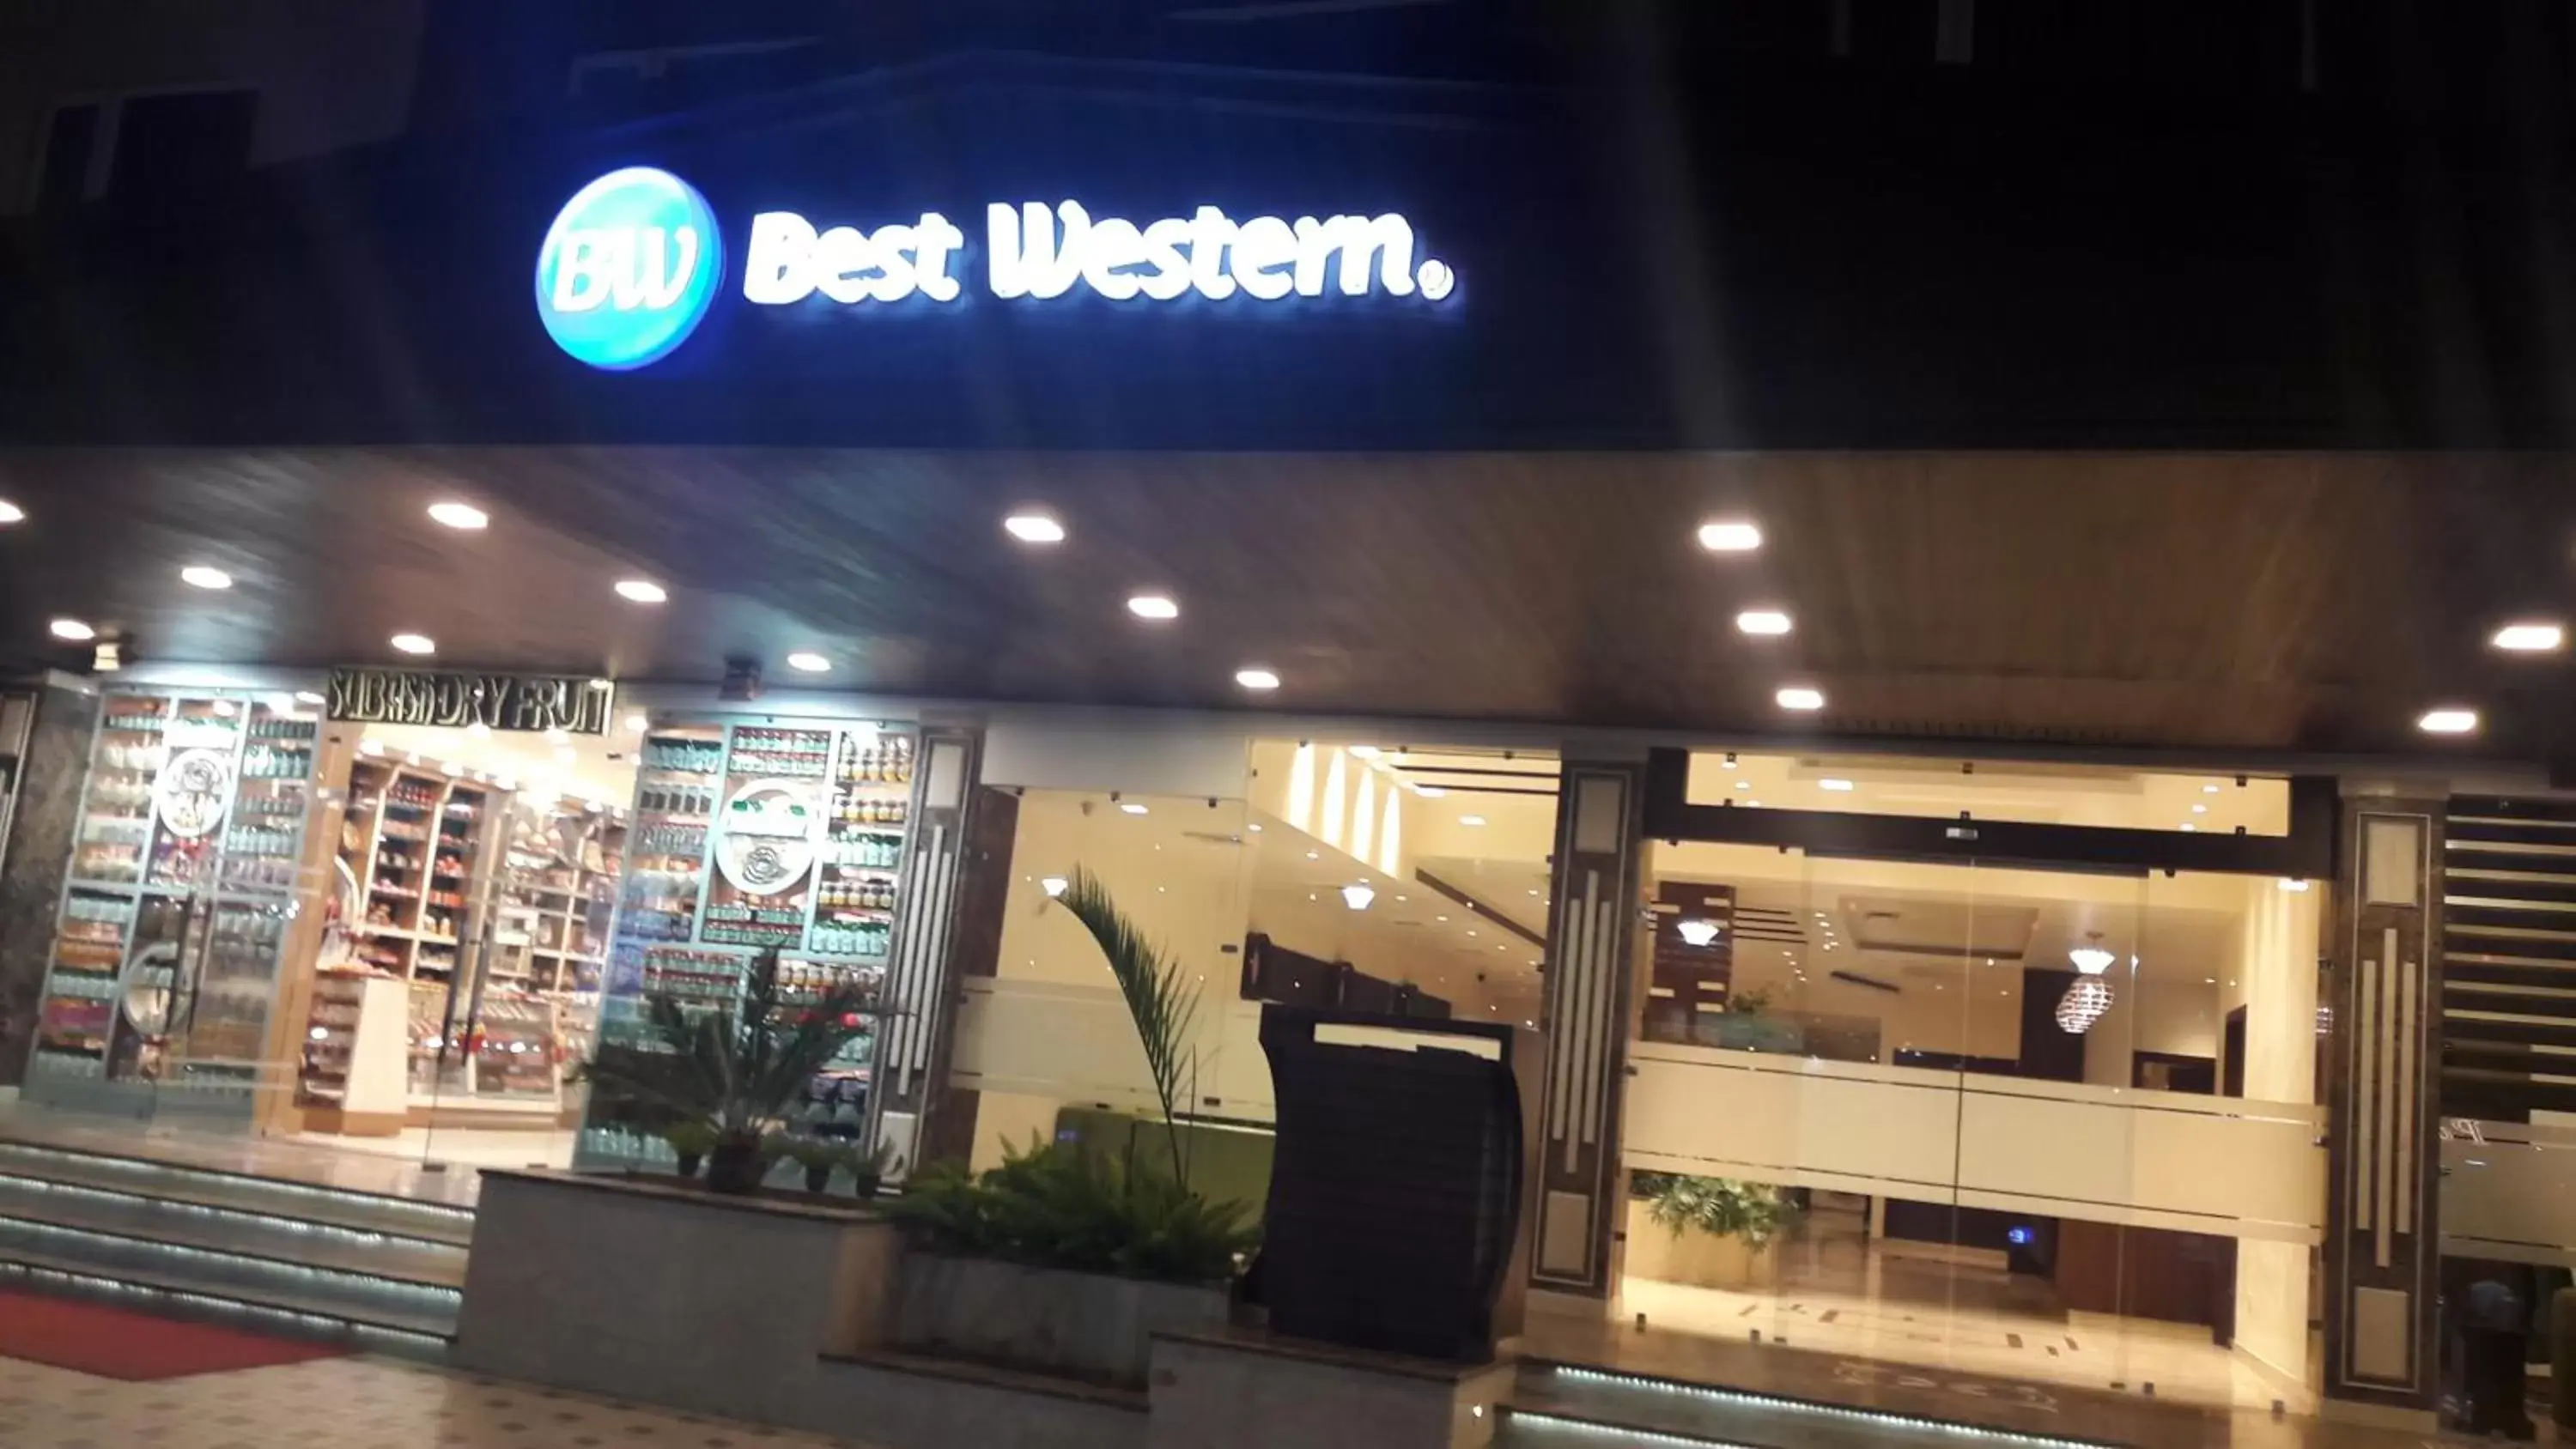 Property logo or sign in Best Western Swing High Katra